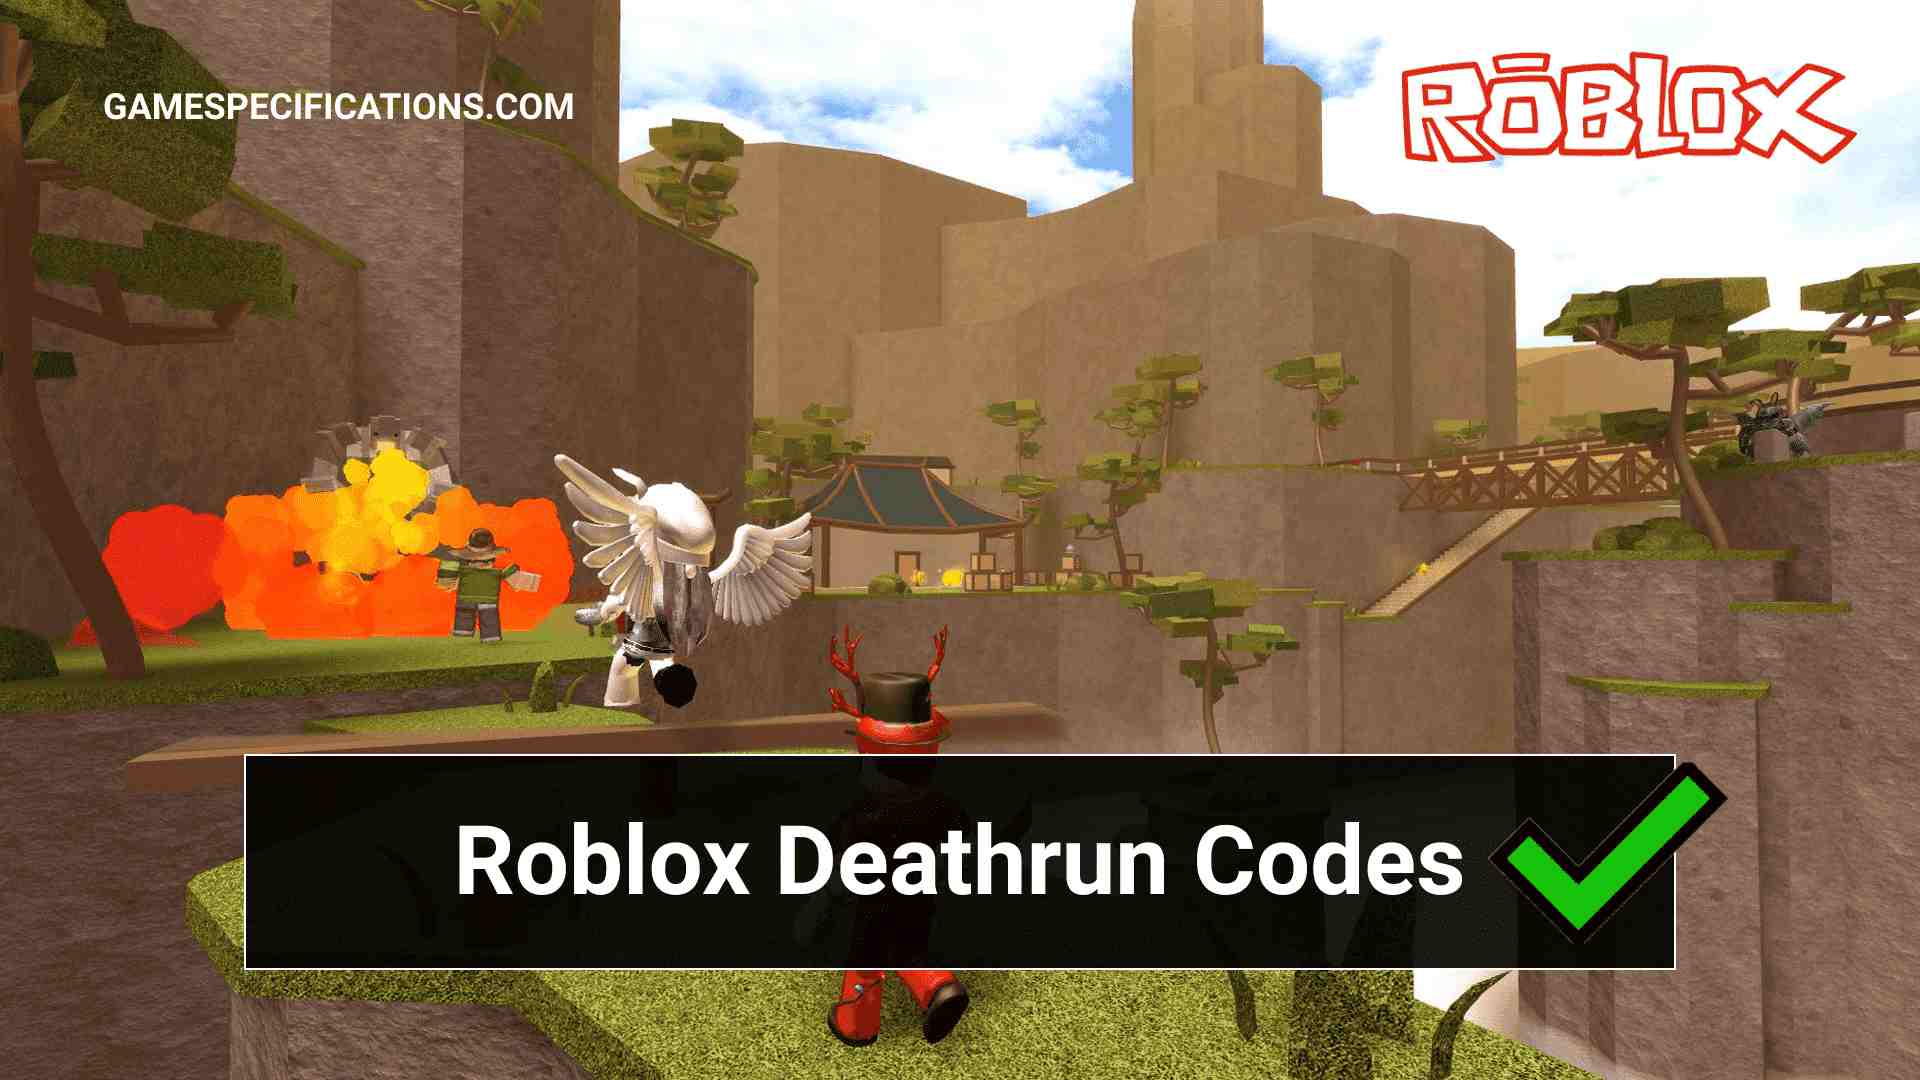 Roblox Deathrun Codes July 2021 Game Specifications - roblox deathrun codes twitter